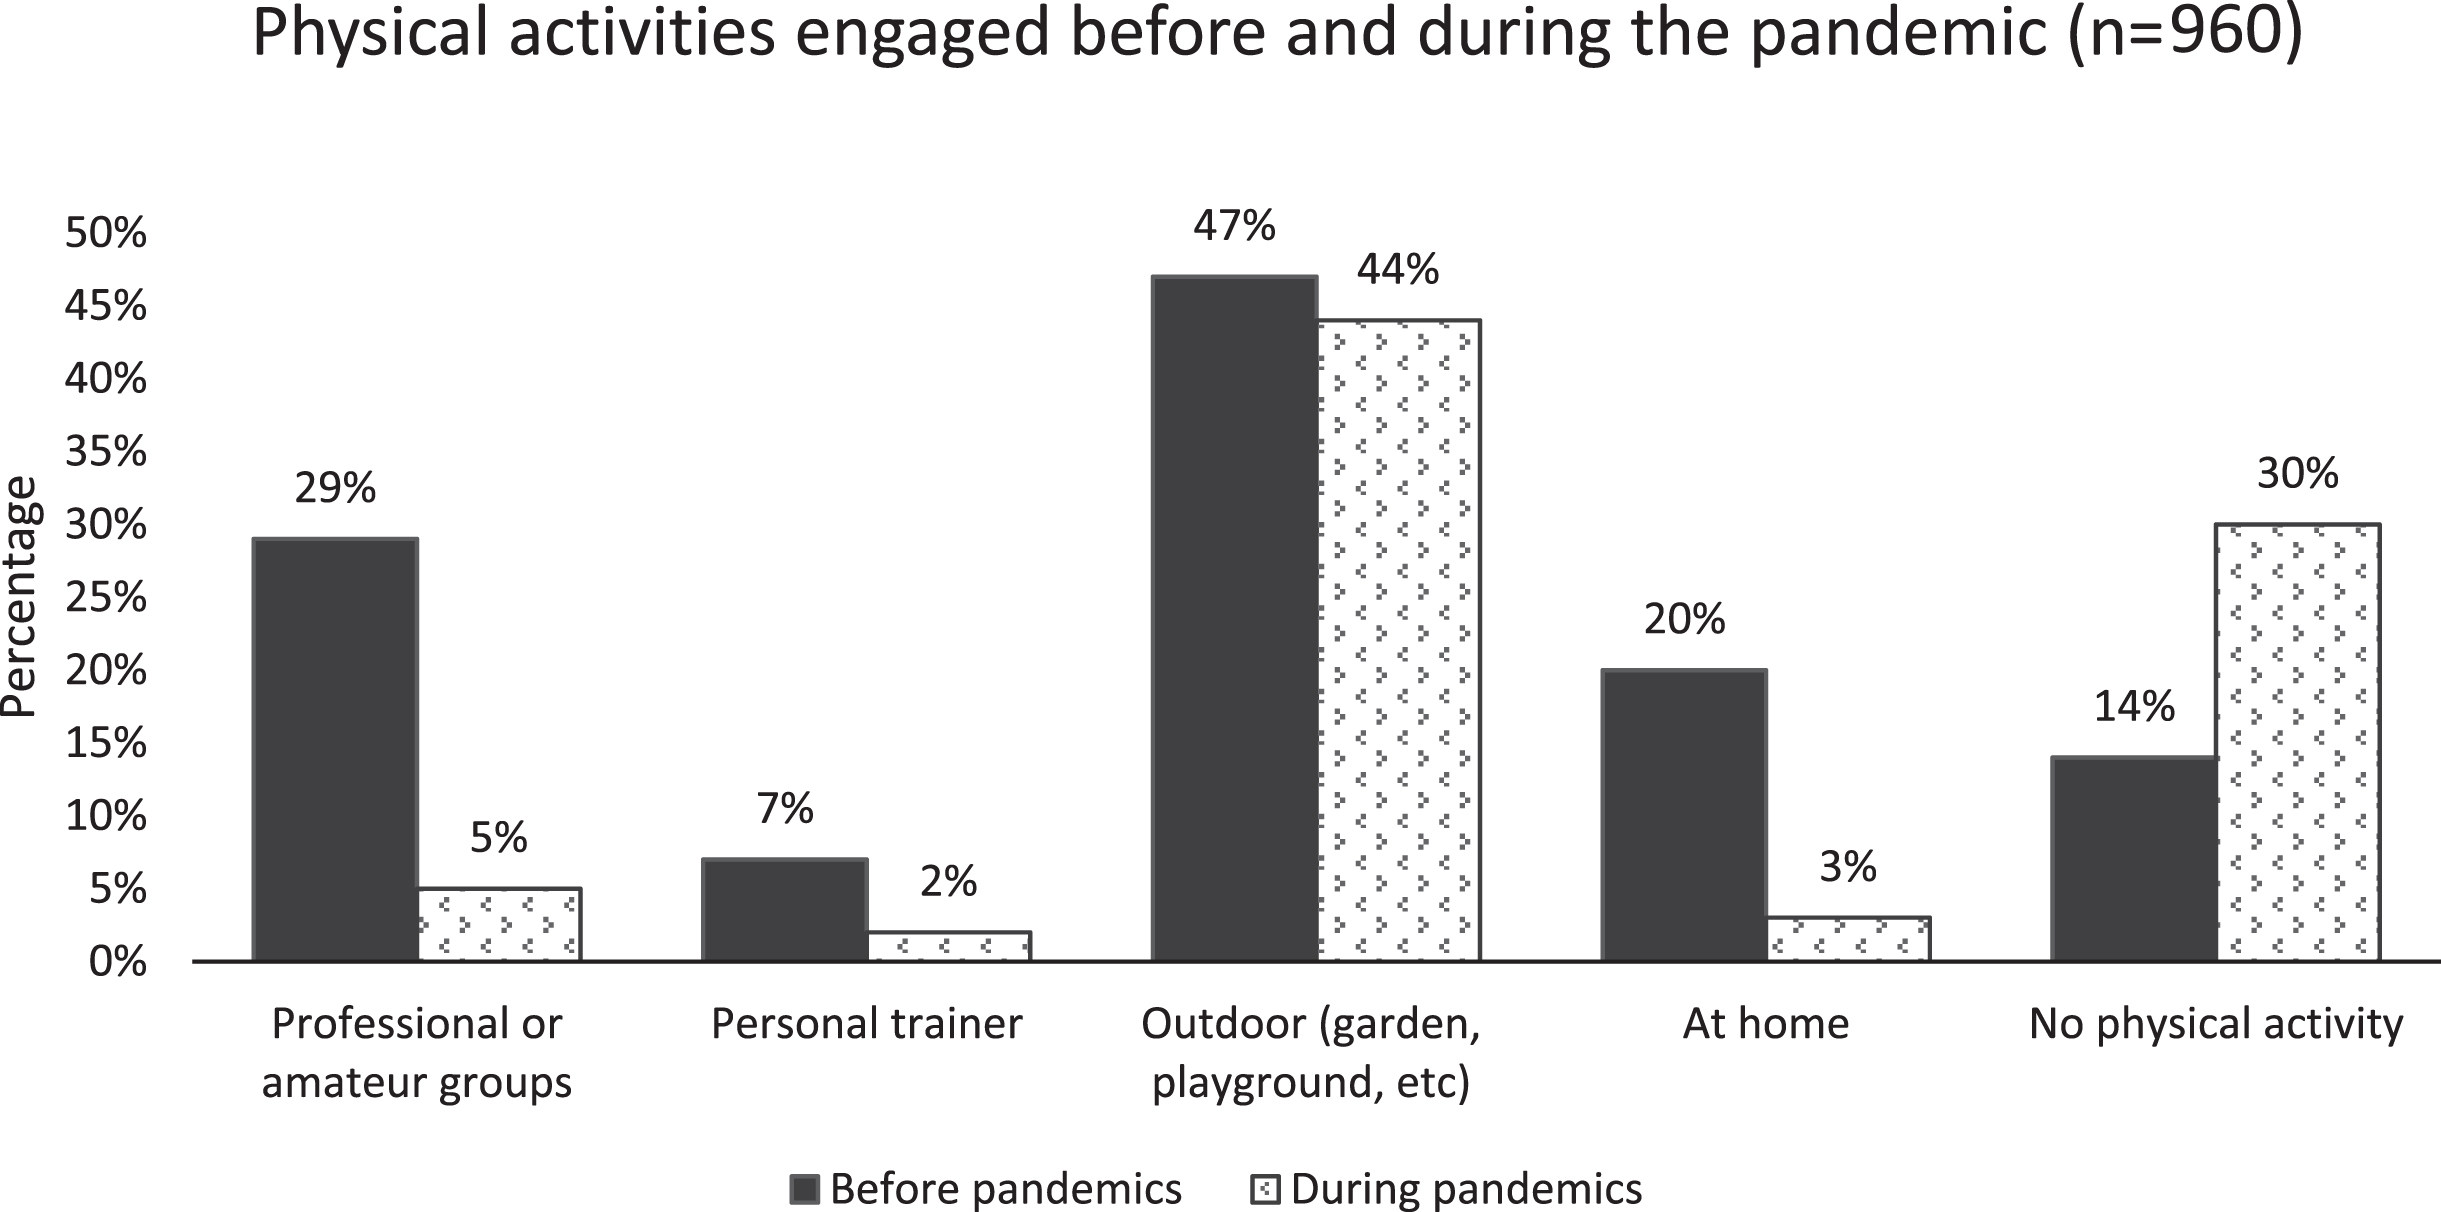 Physical activities engaged before and during the pandemic (n = 960). (Differences between all activities before and during the pandemic were statistically significant, p < 0.001 for each).